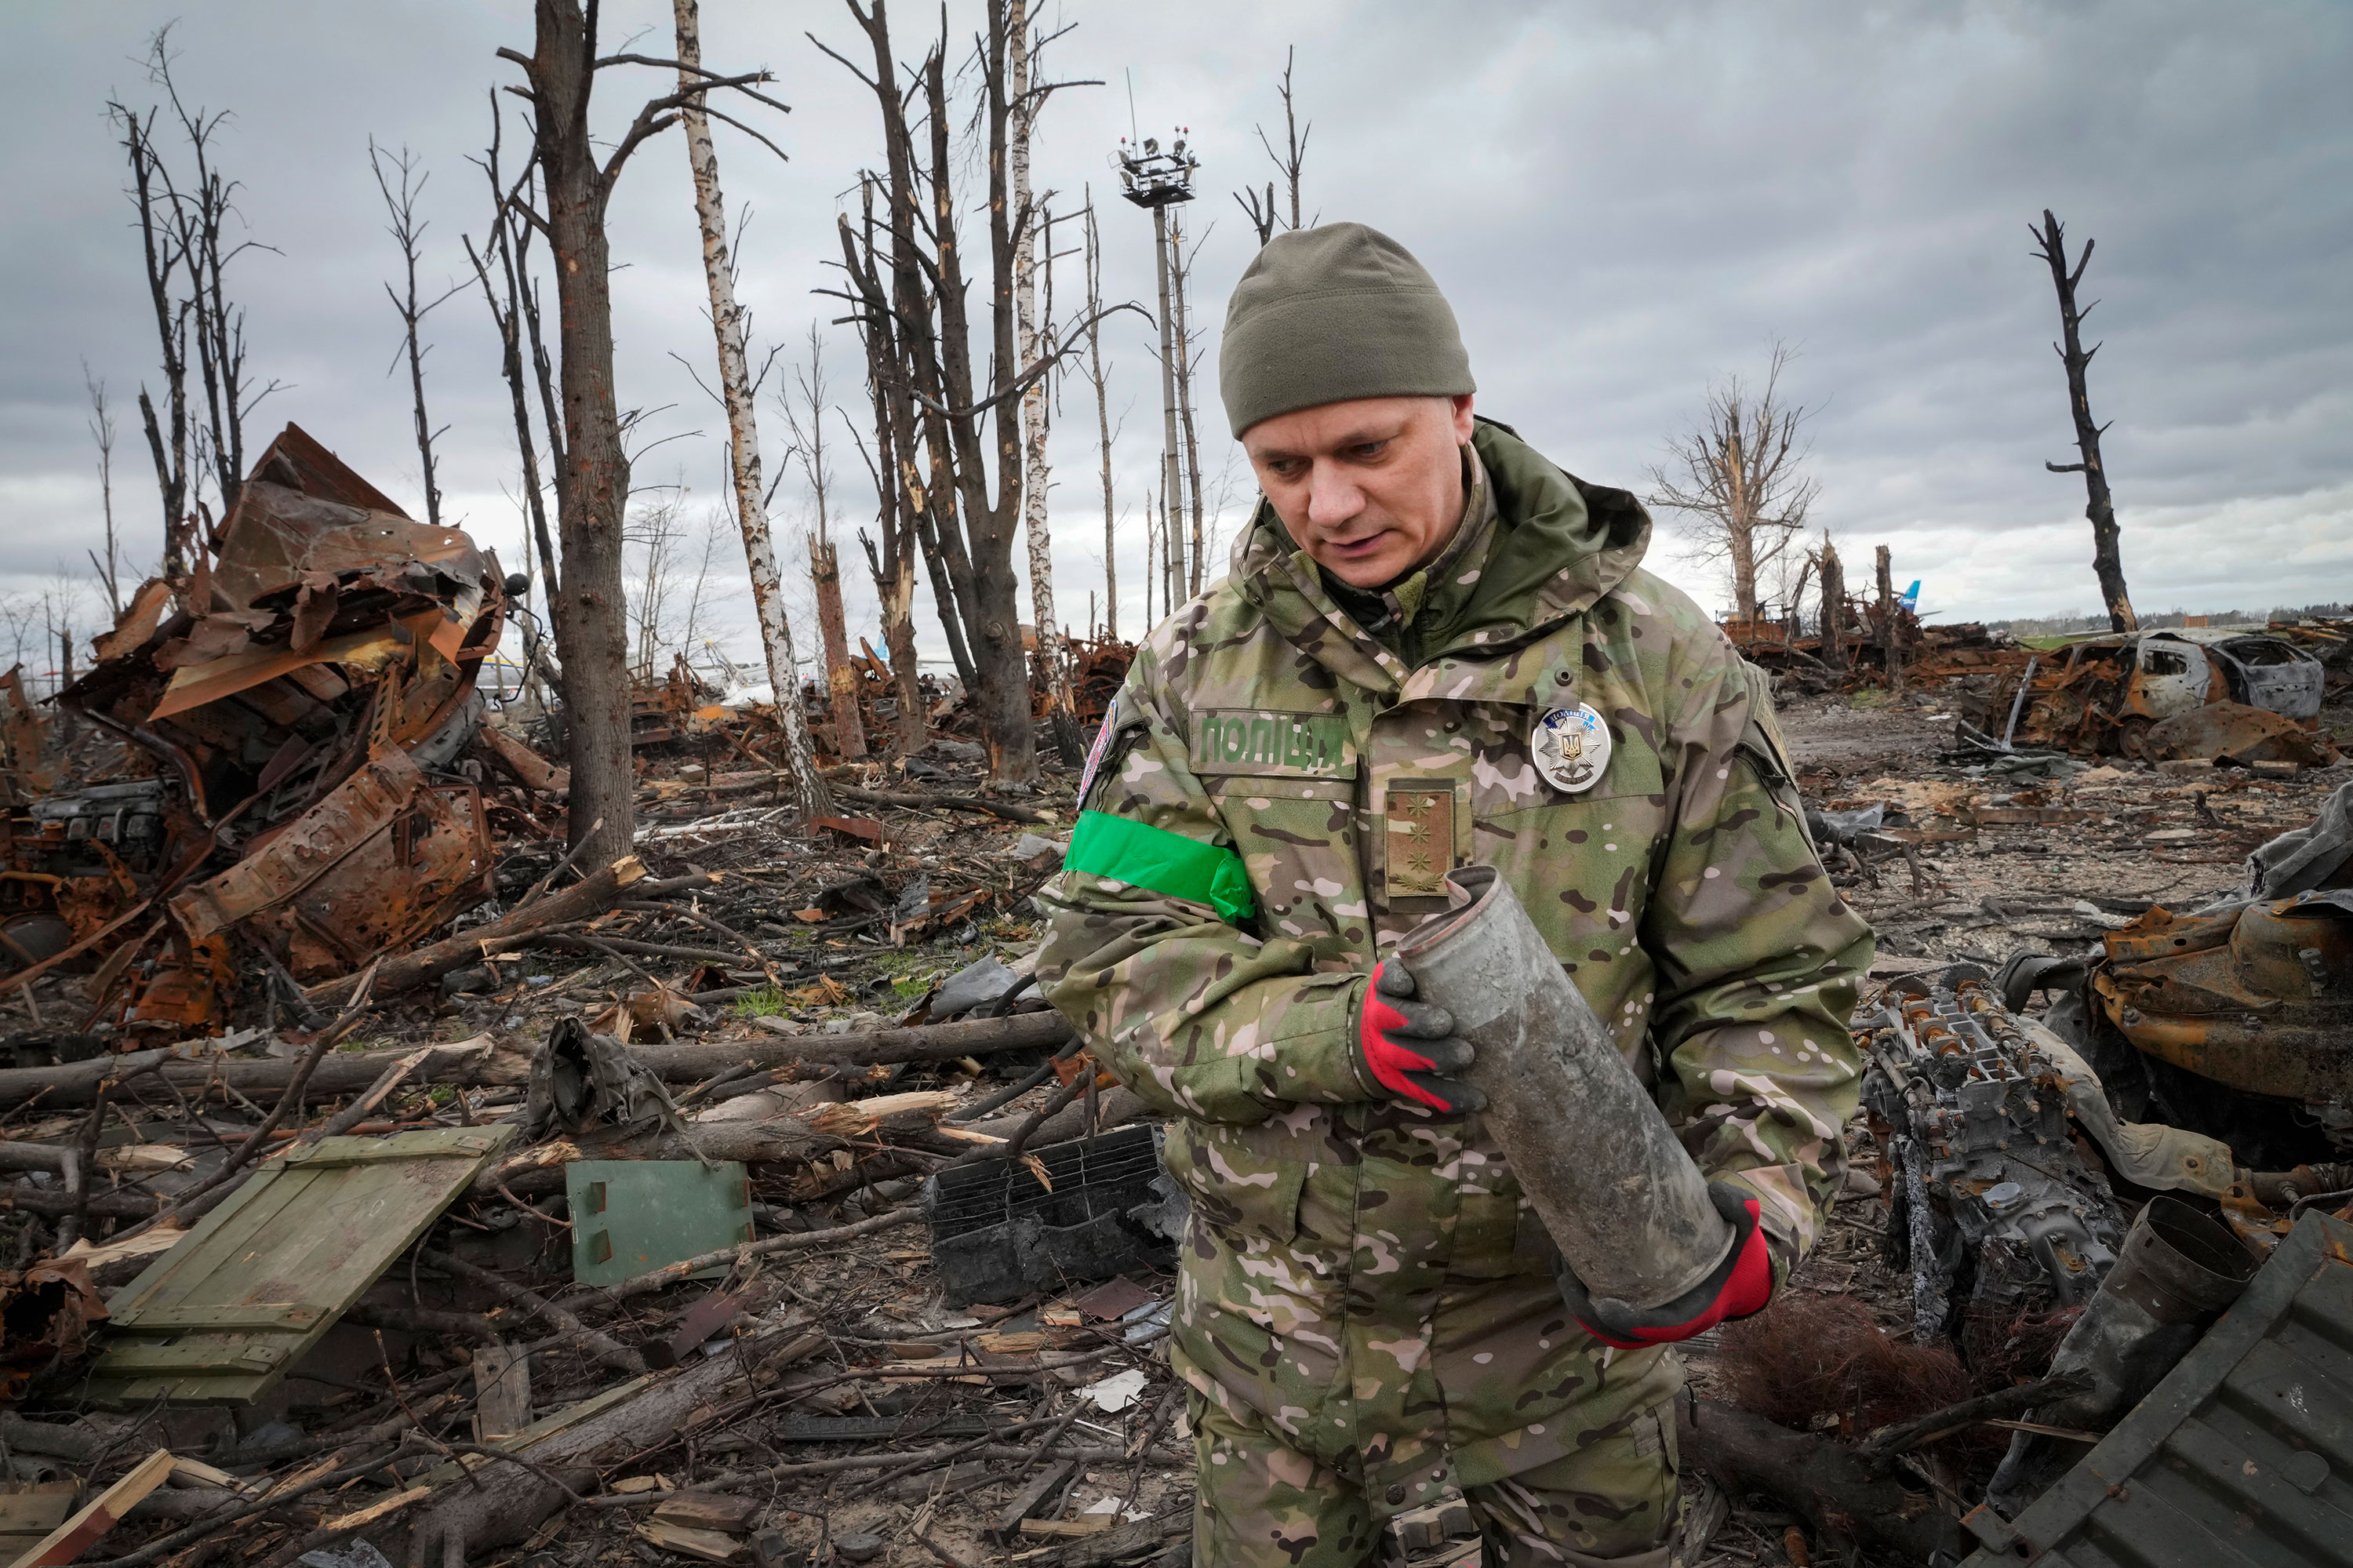 An Interior Ministry explosives expert collects unexploded ordnance in Hostomil, Ukraine, on April 18.